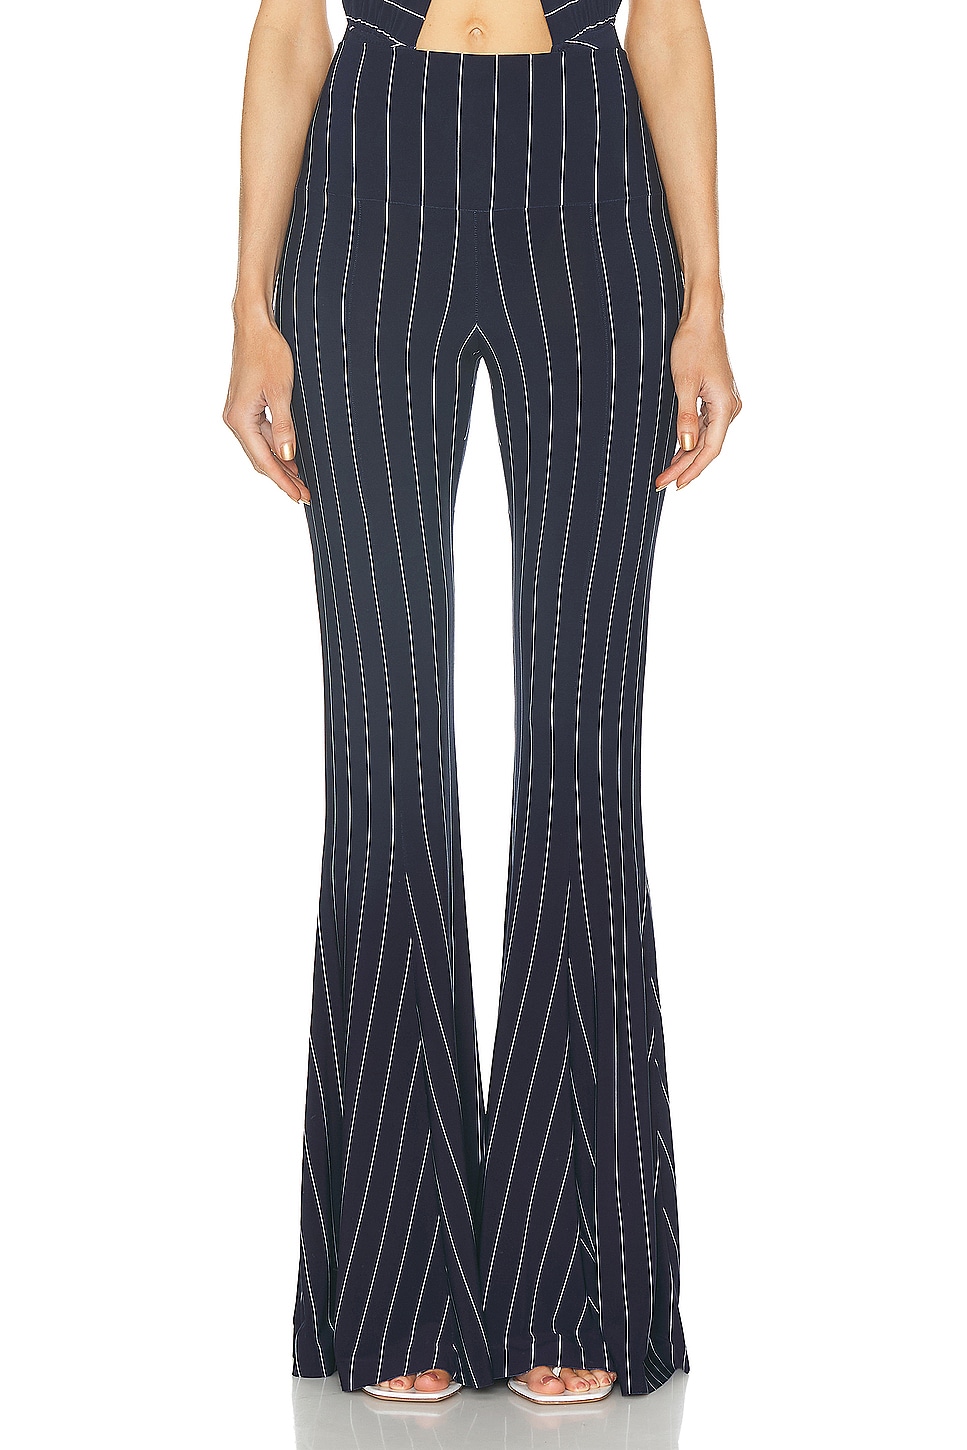 Image 1 of Norma Kamali Fishtail Pant in True Navy Pinstripe